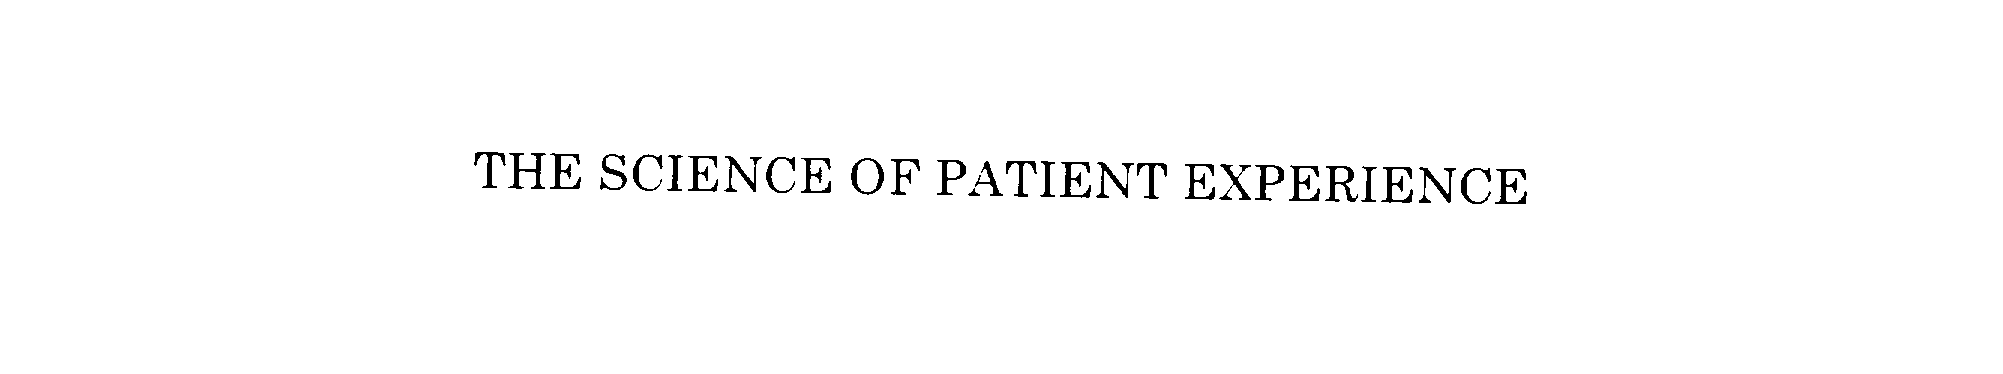  THE SCIENCE OF PATIENT EXPERIENCE